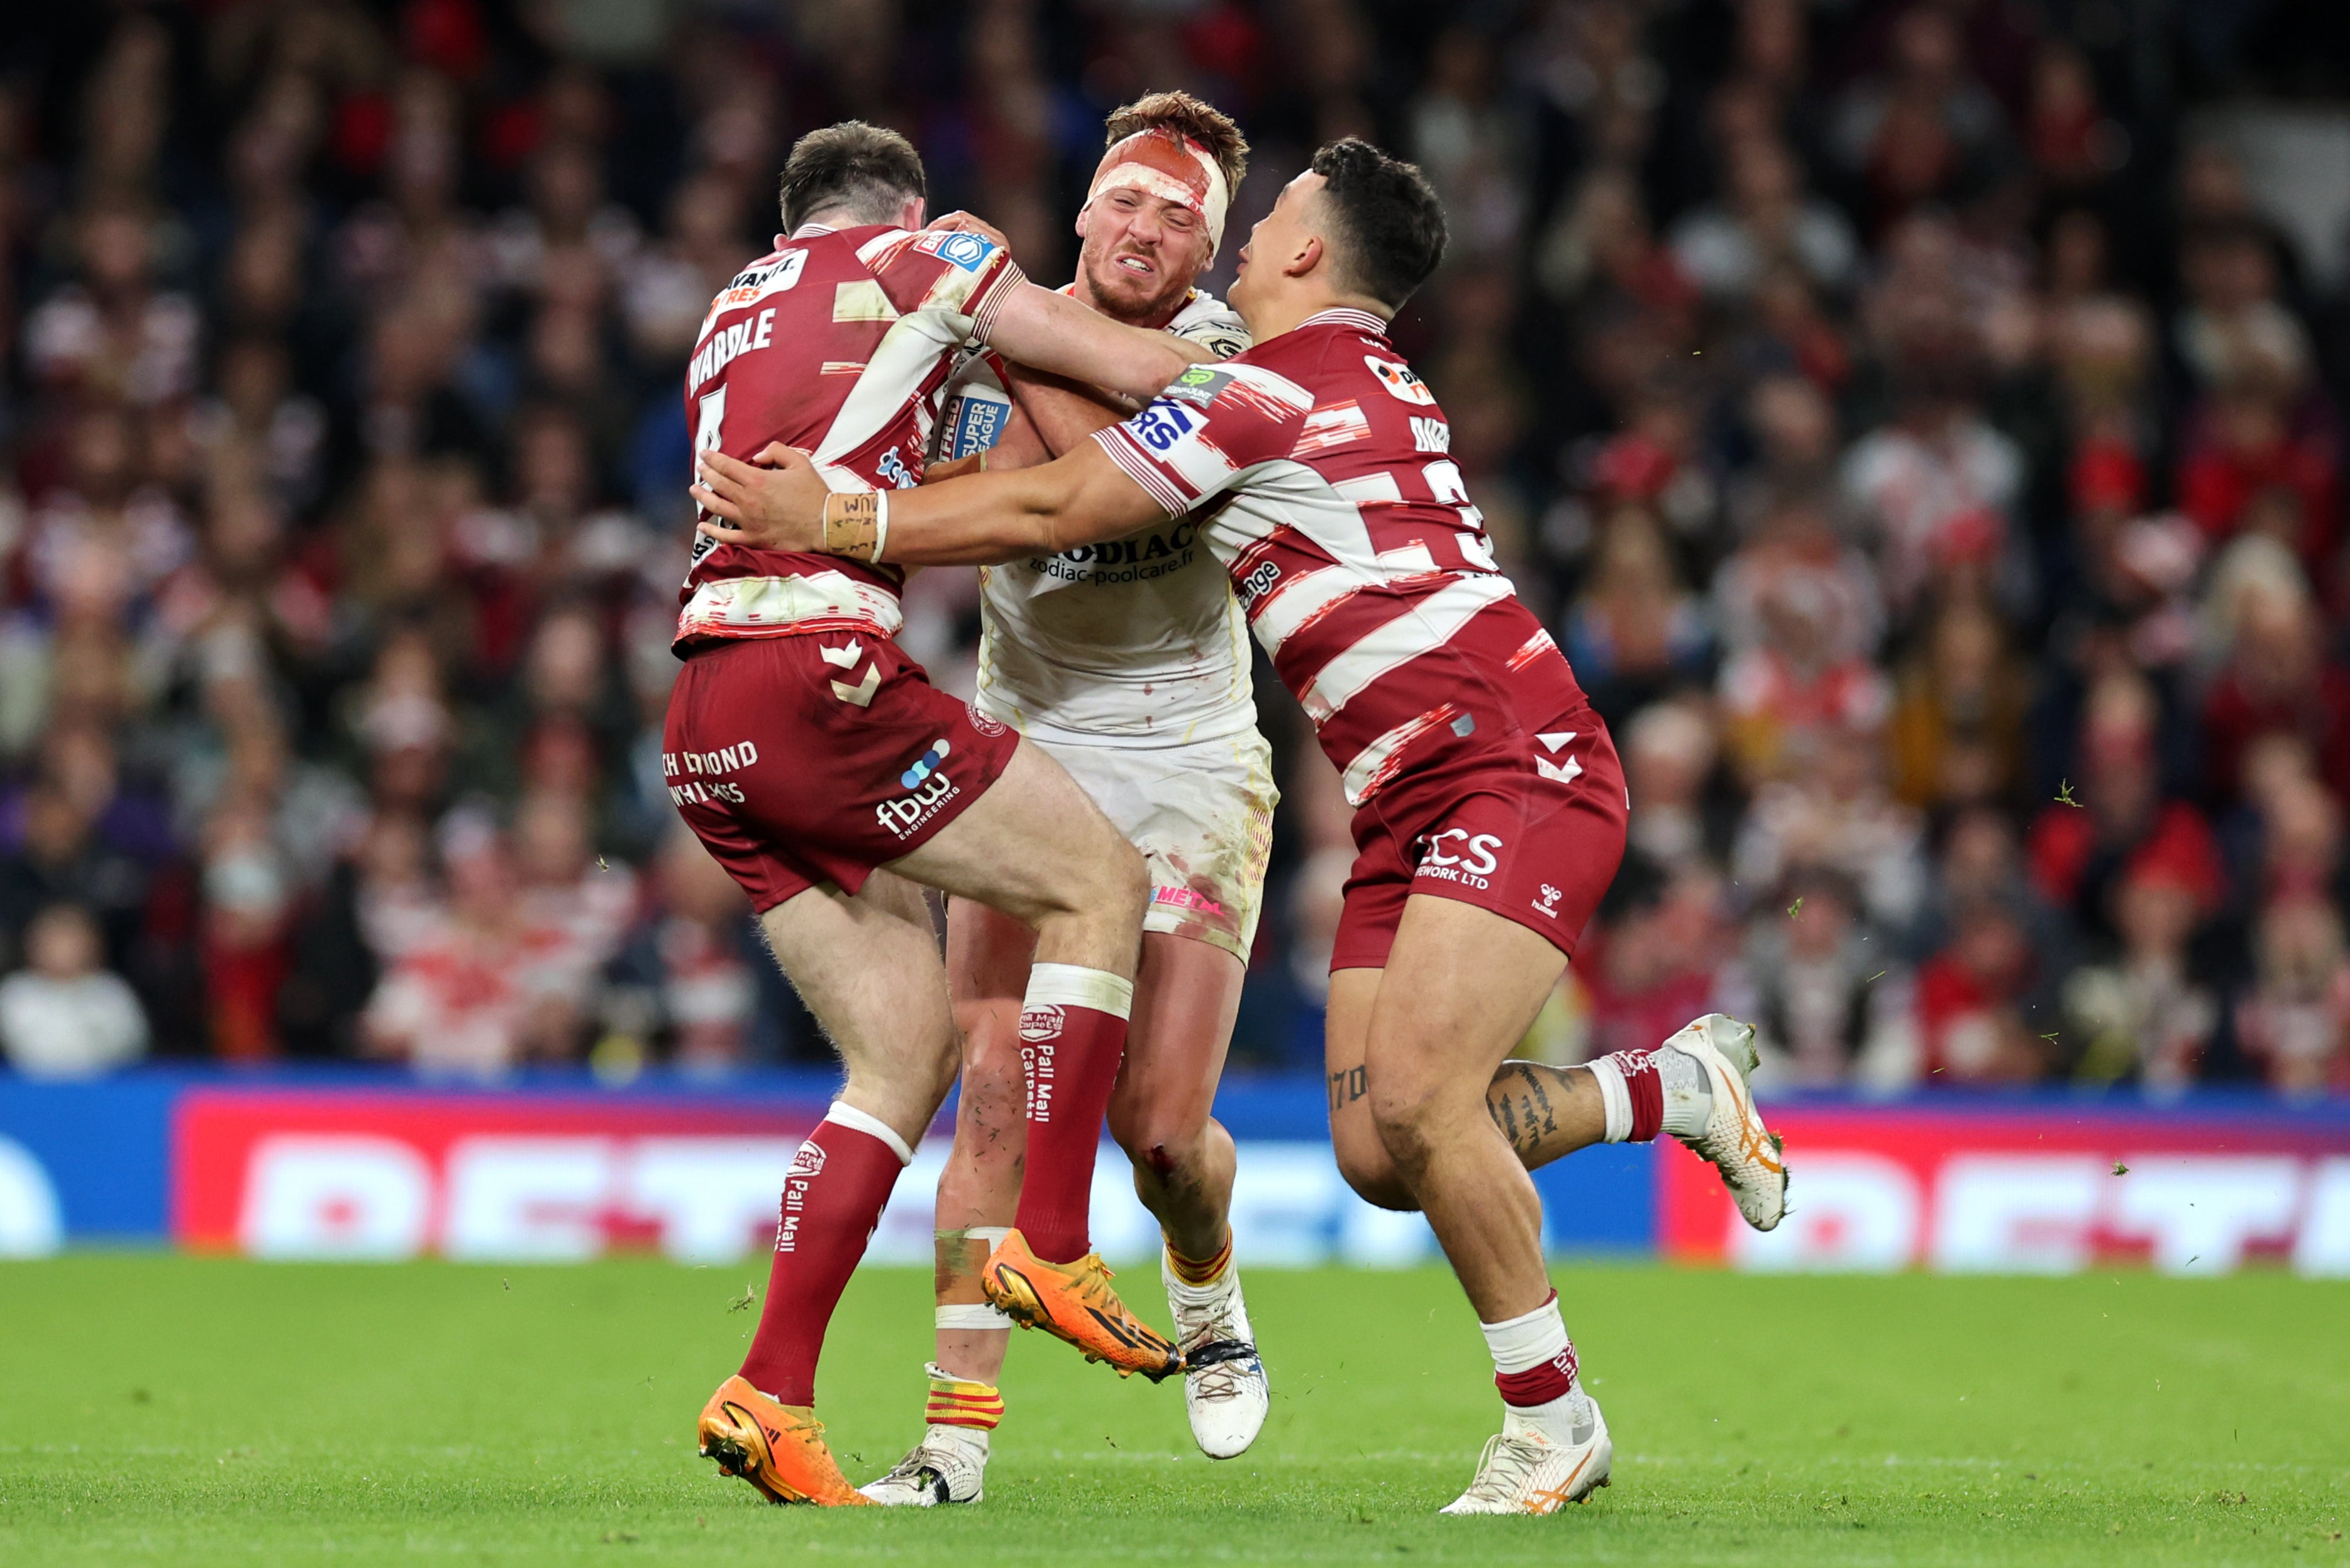 Rugby league has followed rugby union in moving to reduce tackle height